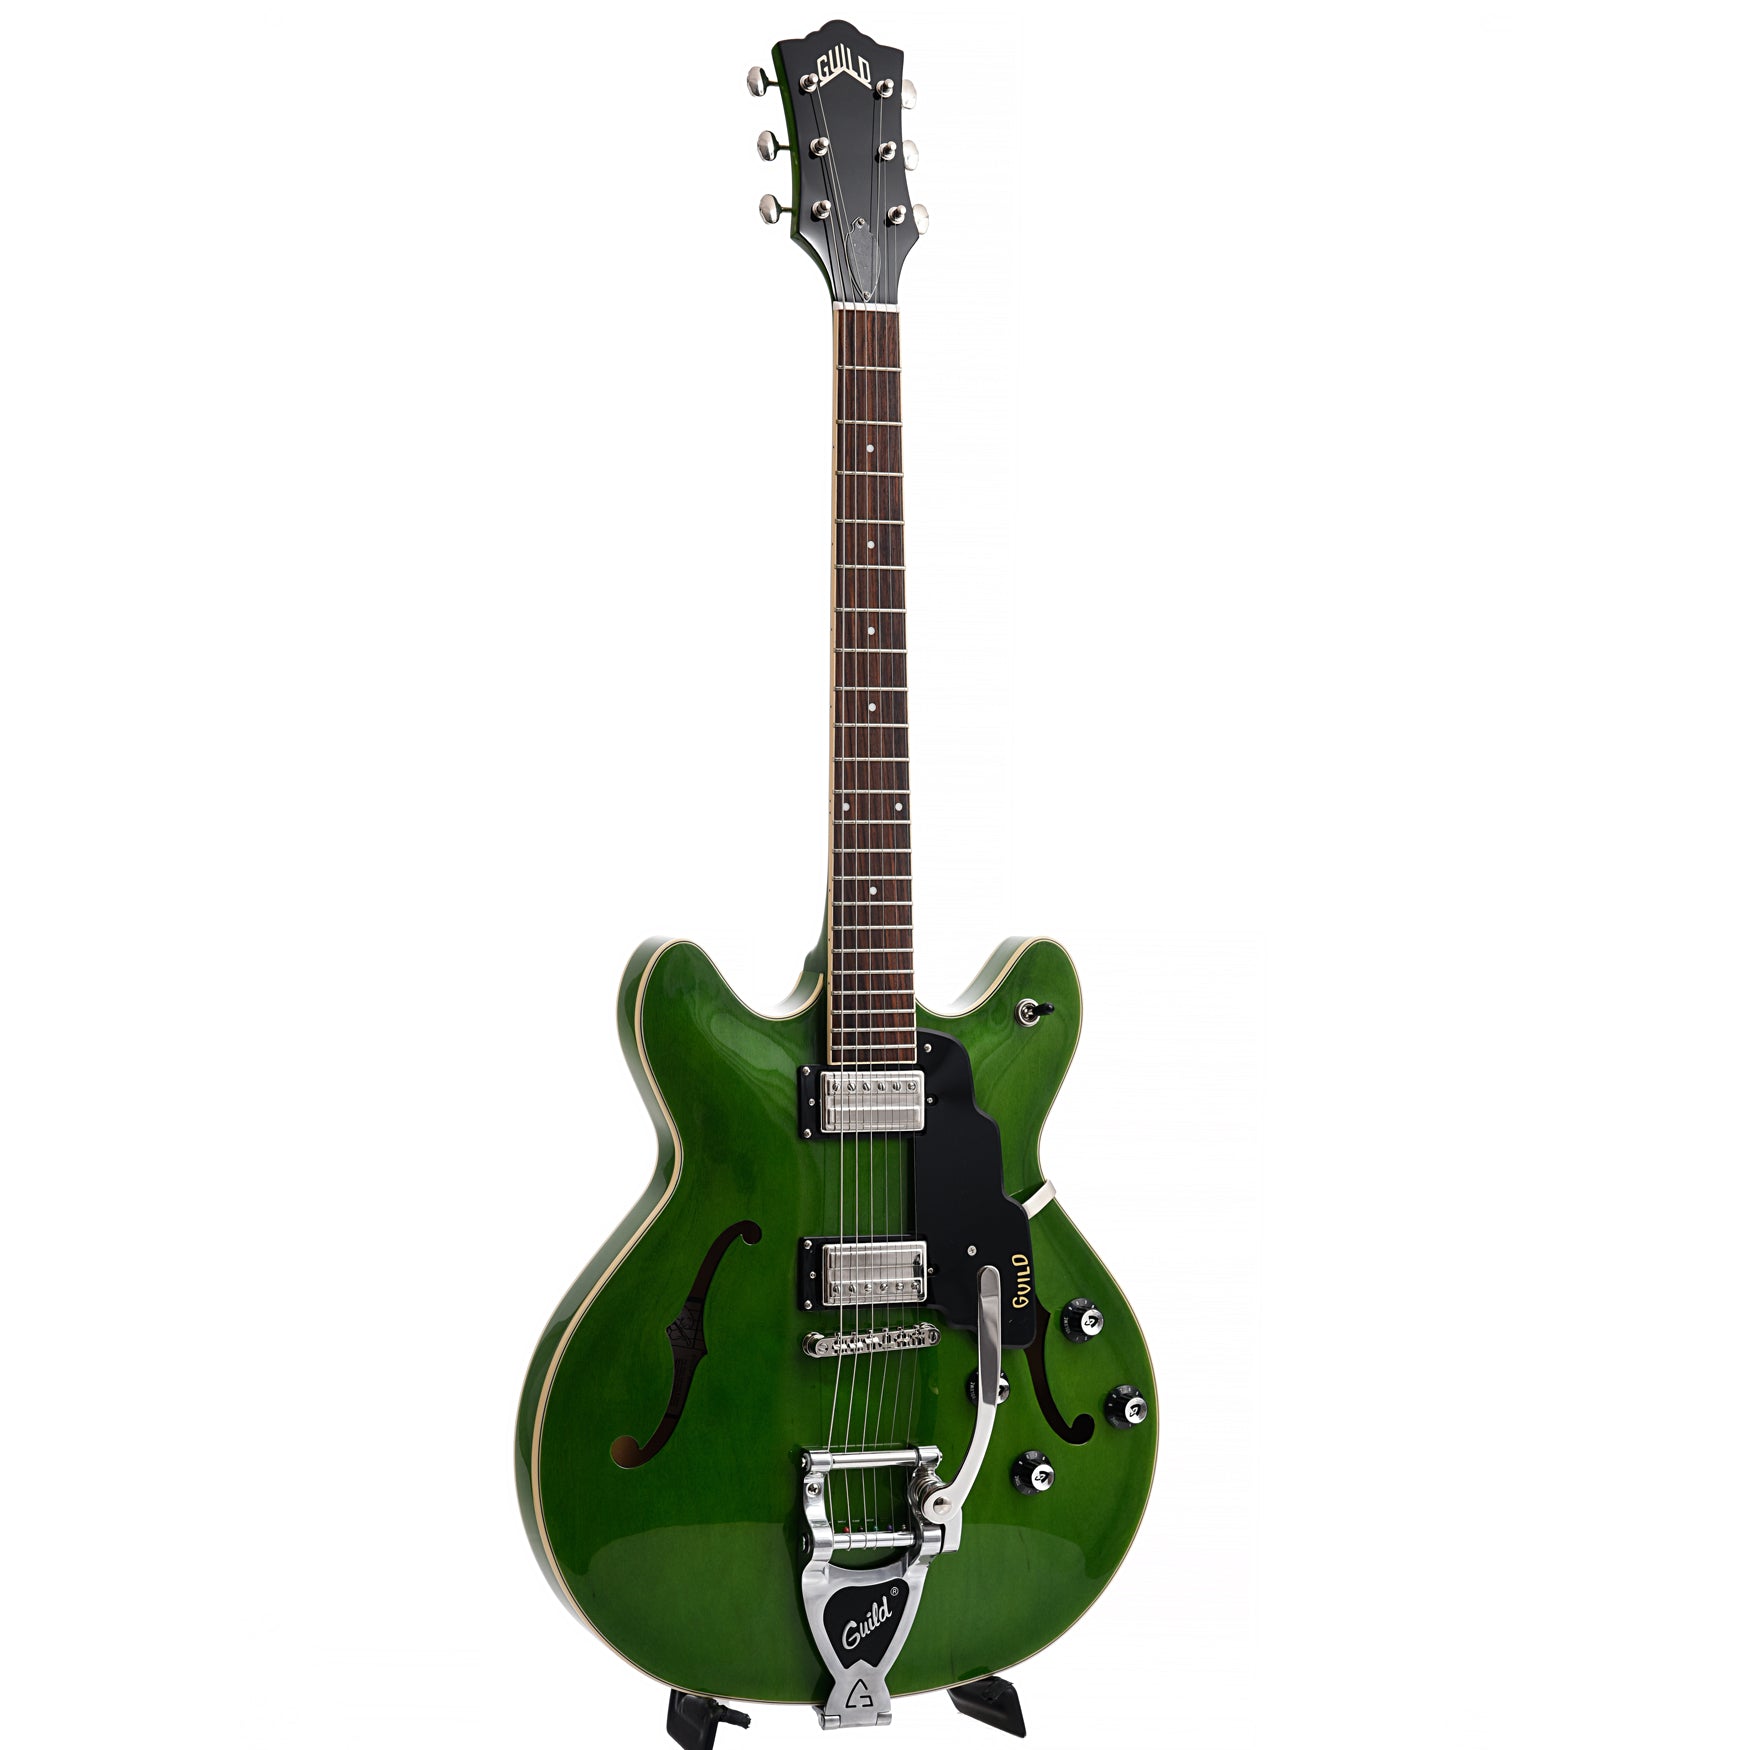 Image 2 of Guild Starfire I Double Cutaway Semi-Hollow Body Guitar with Vibrato, Emerald Green - SKU# GSF1DCV-GRN : Product Type Hollow Body Electric Guitars : Elderly Instruments